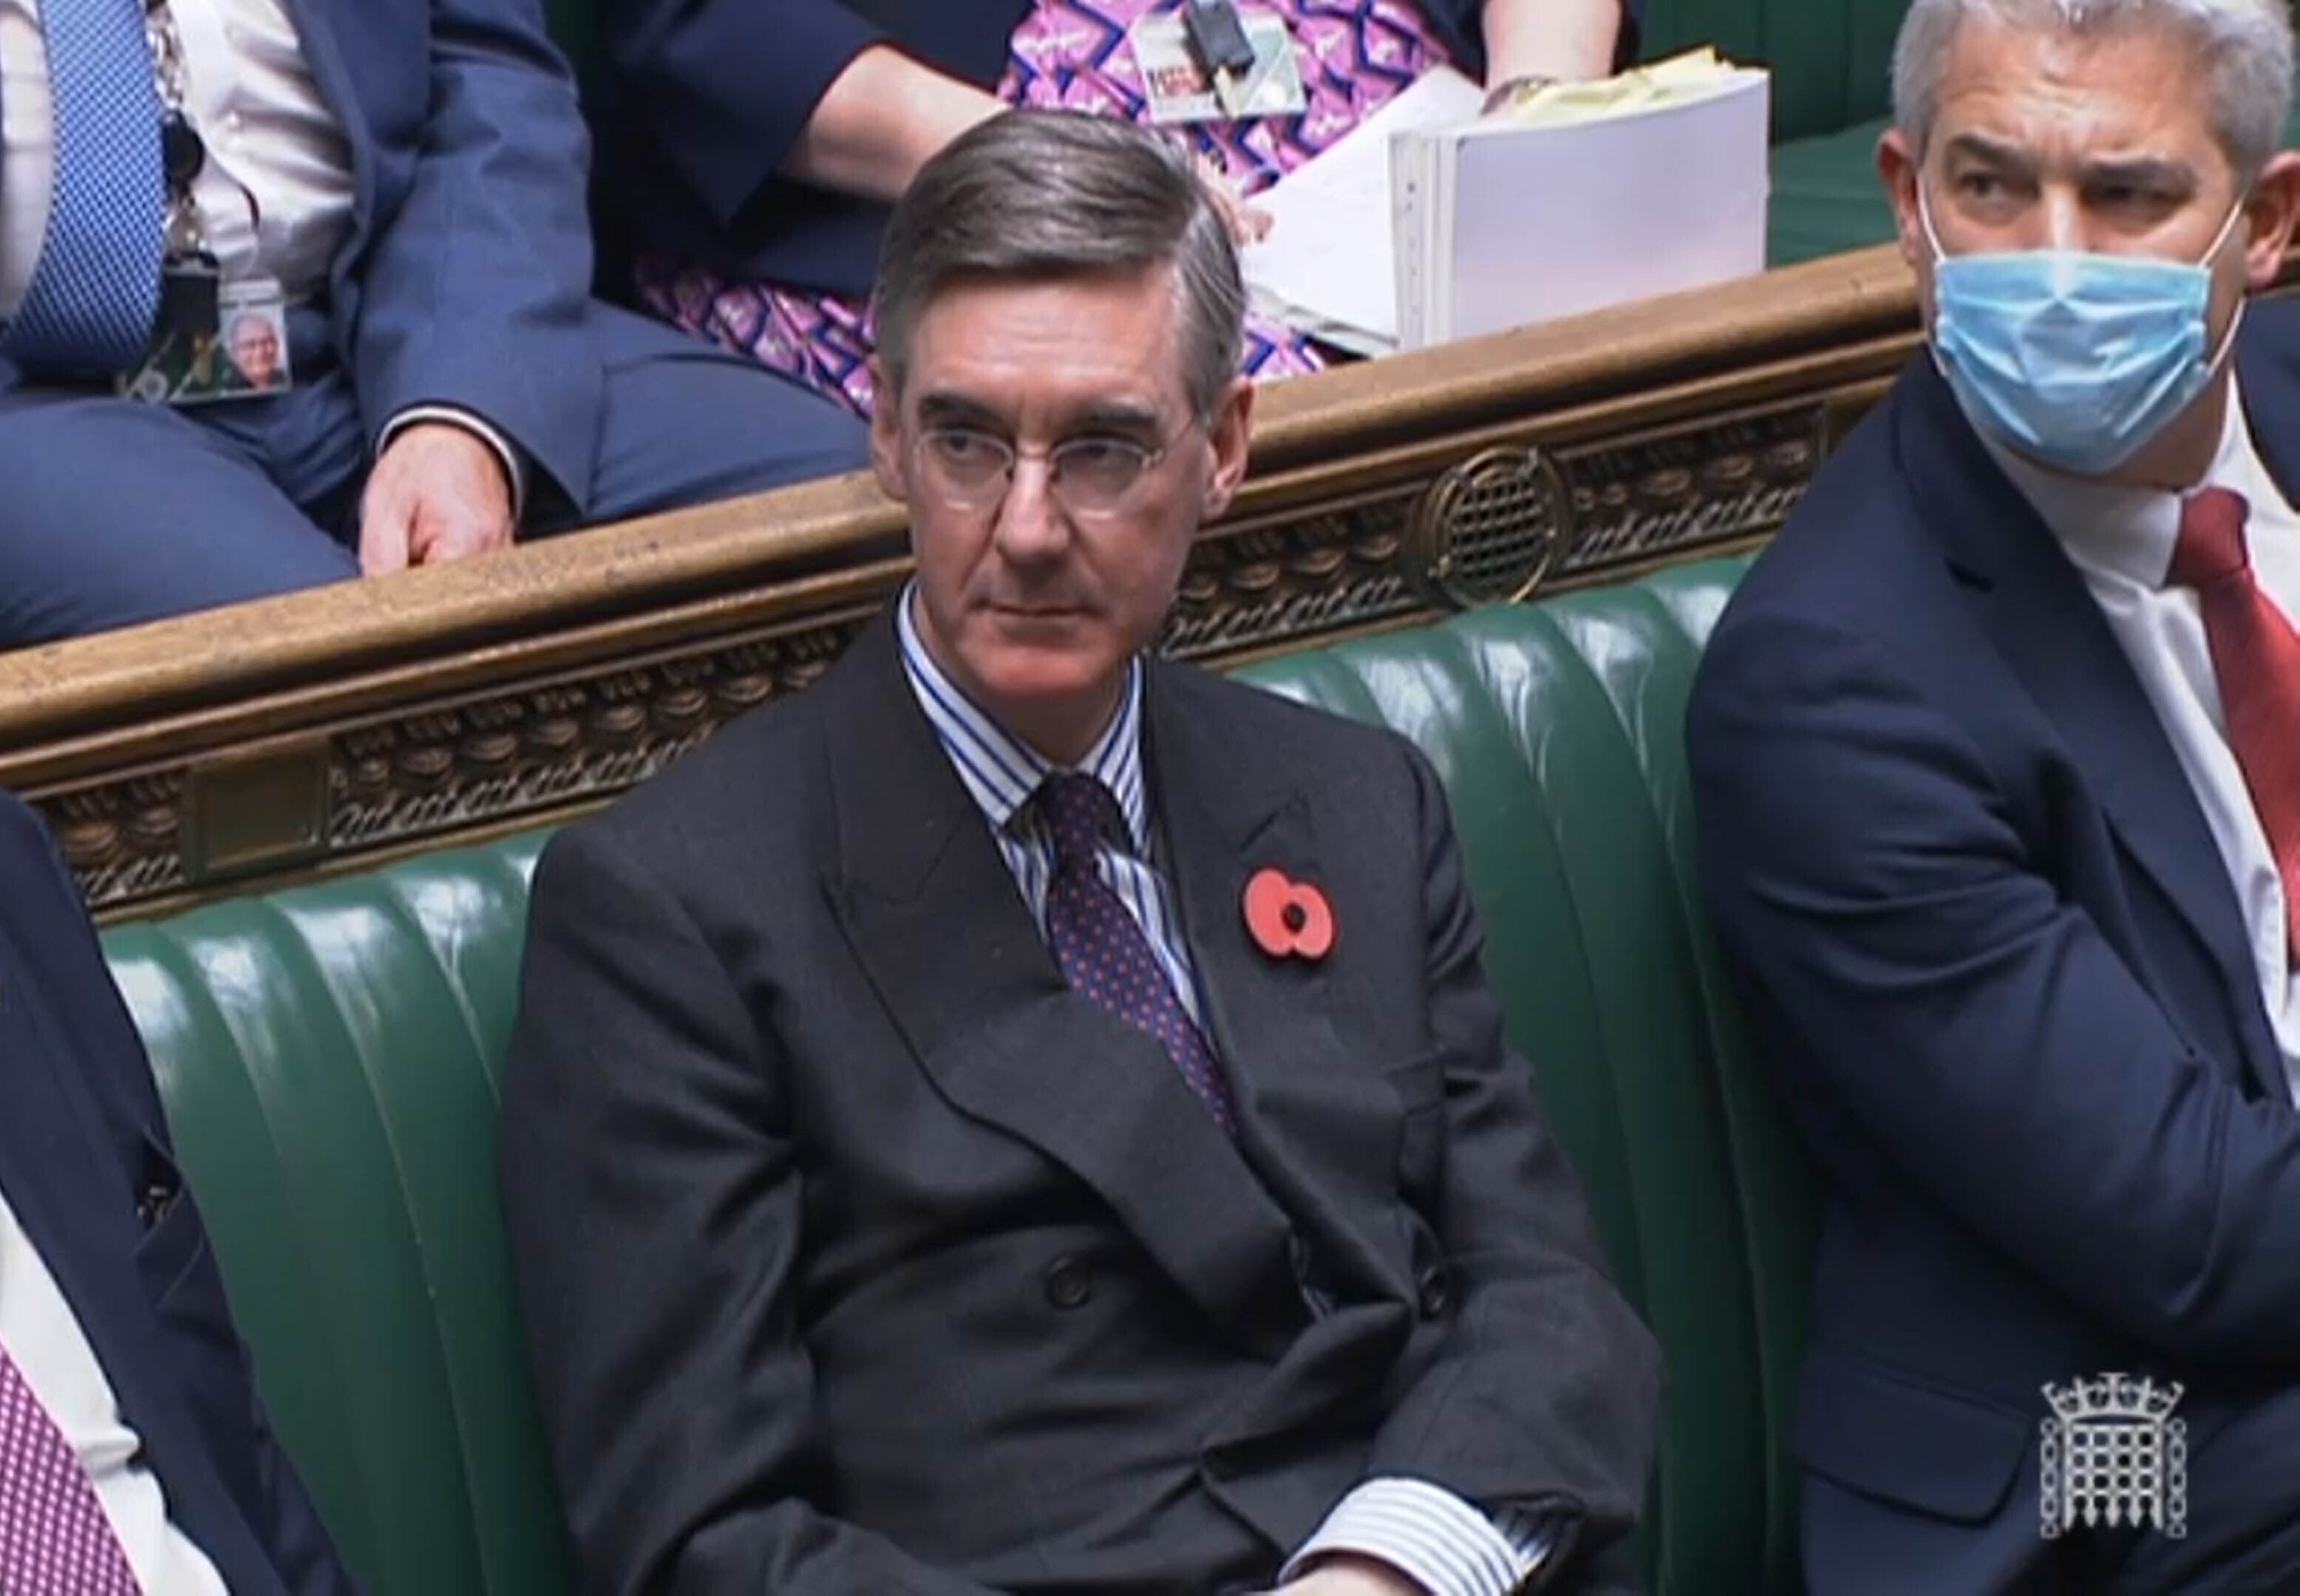 Leader of the House of Commons Jacob Rees-Mogg (House of Commons/PA)